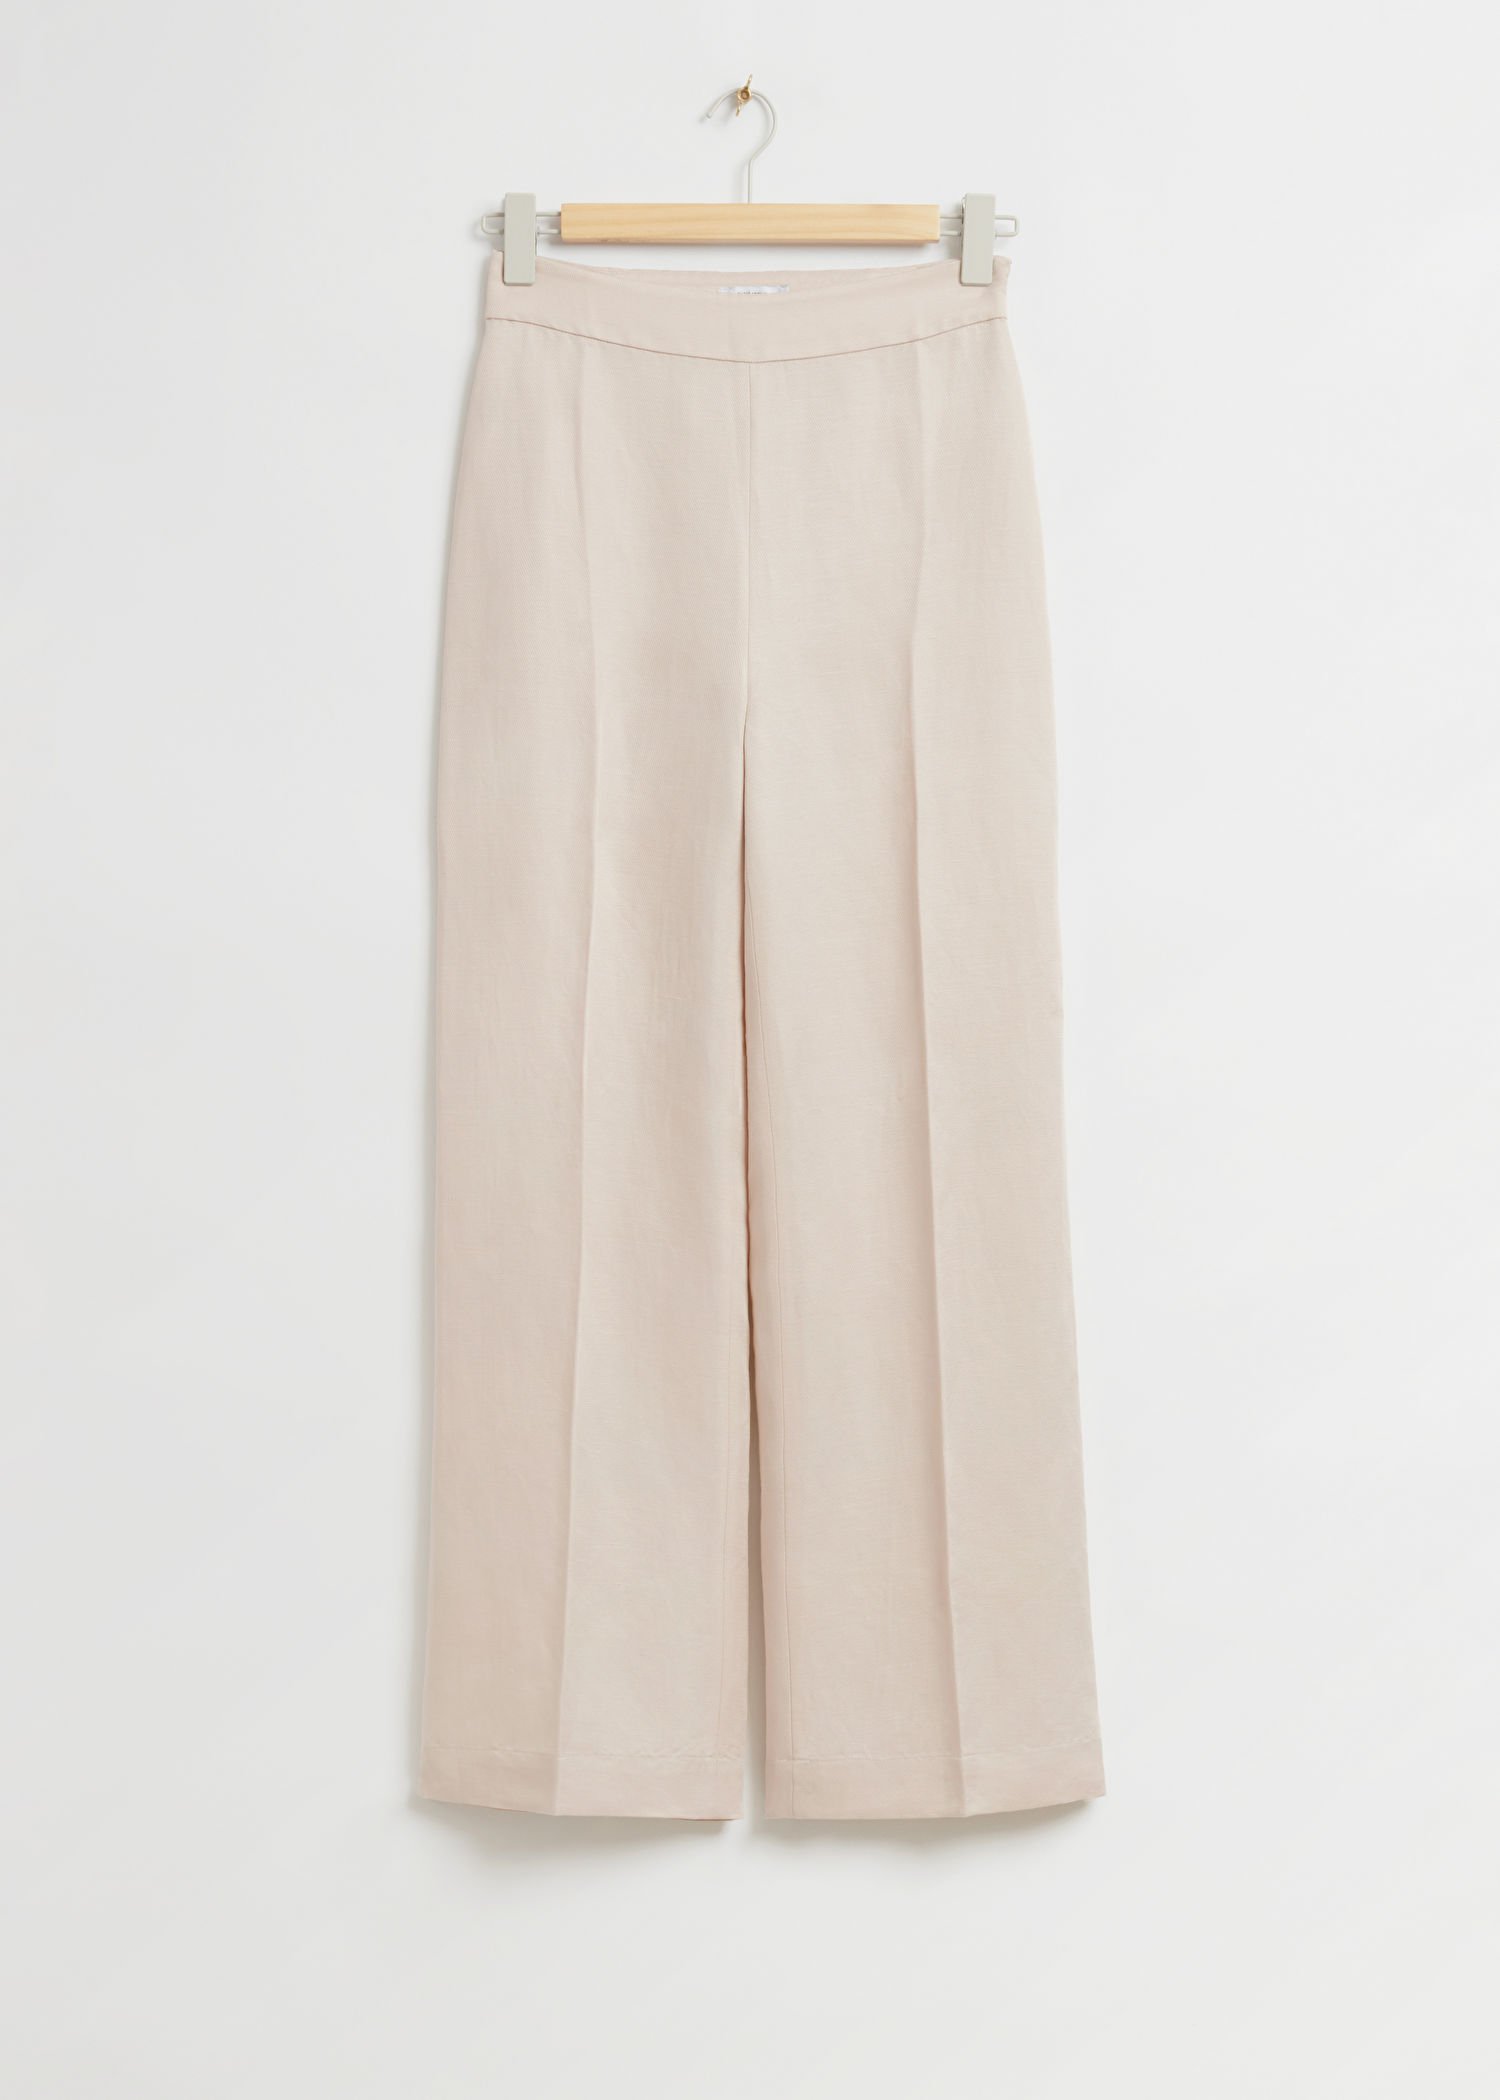  Other Stories linen mix tailored pants in beige - part of a set